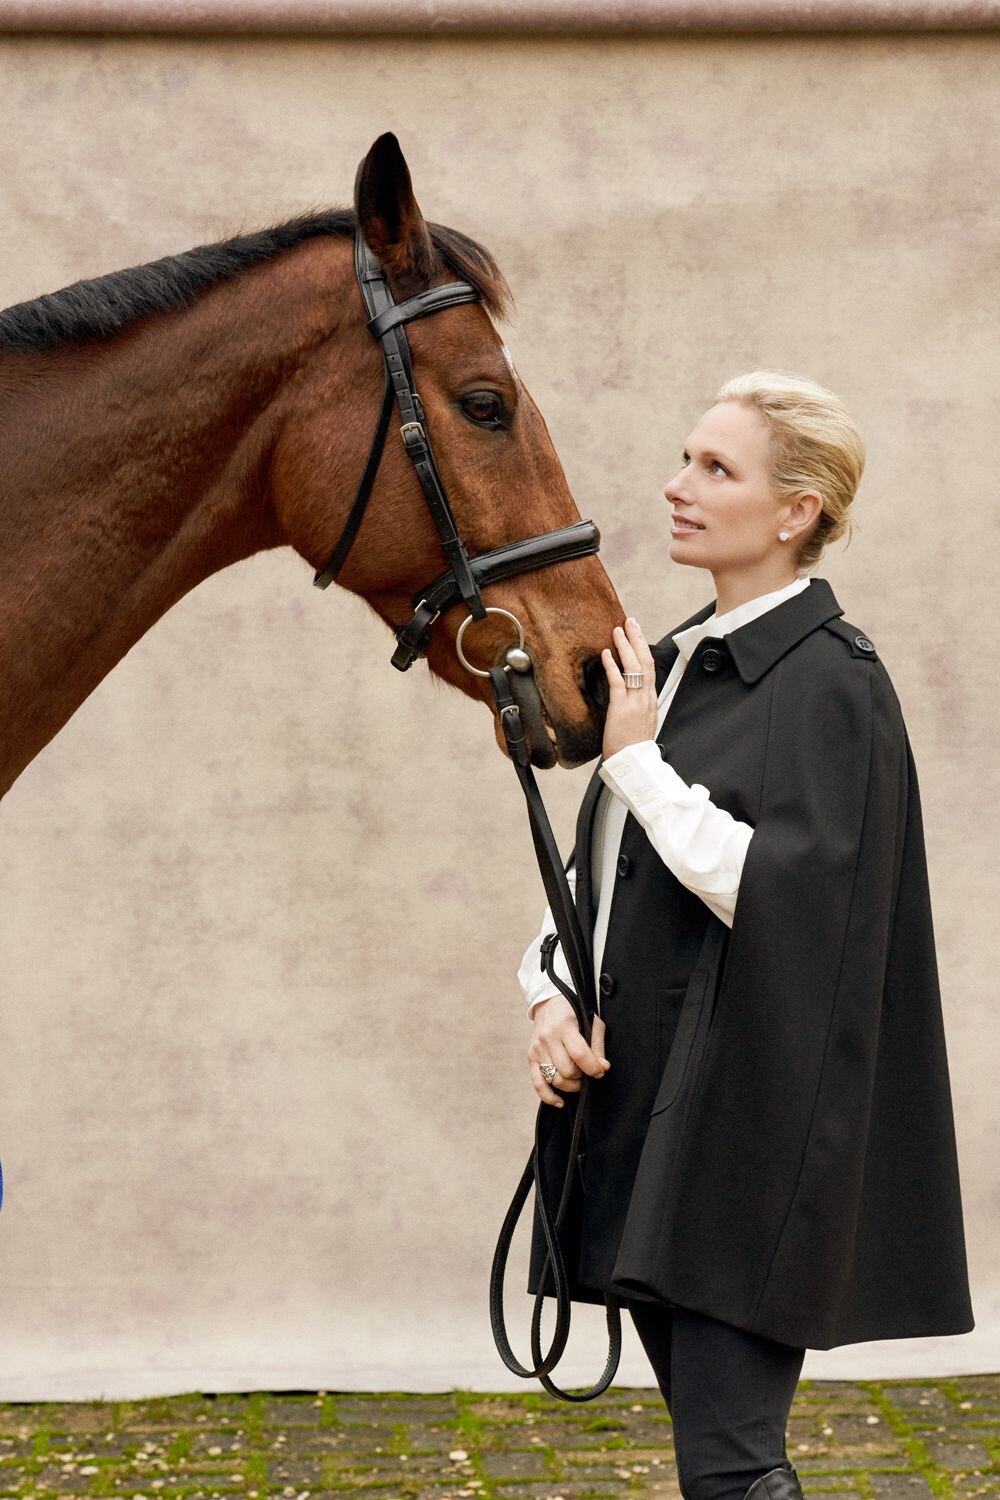 HAPACA - Zara Tindall by Philip Sinden for Town and Country Magazine